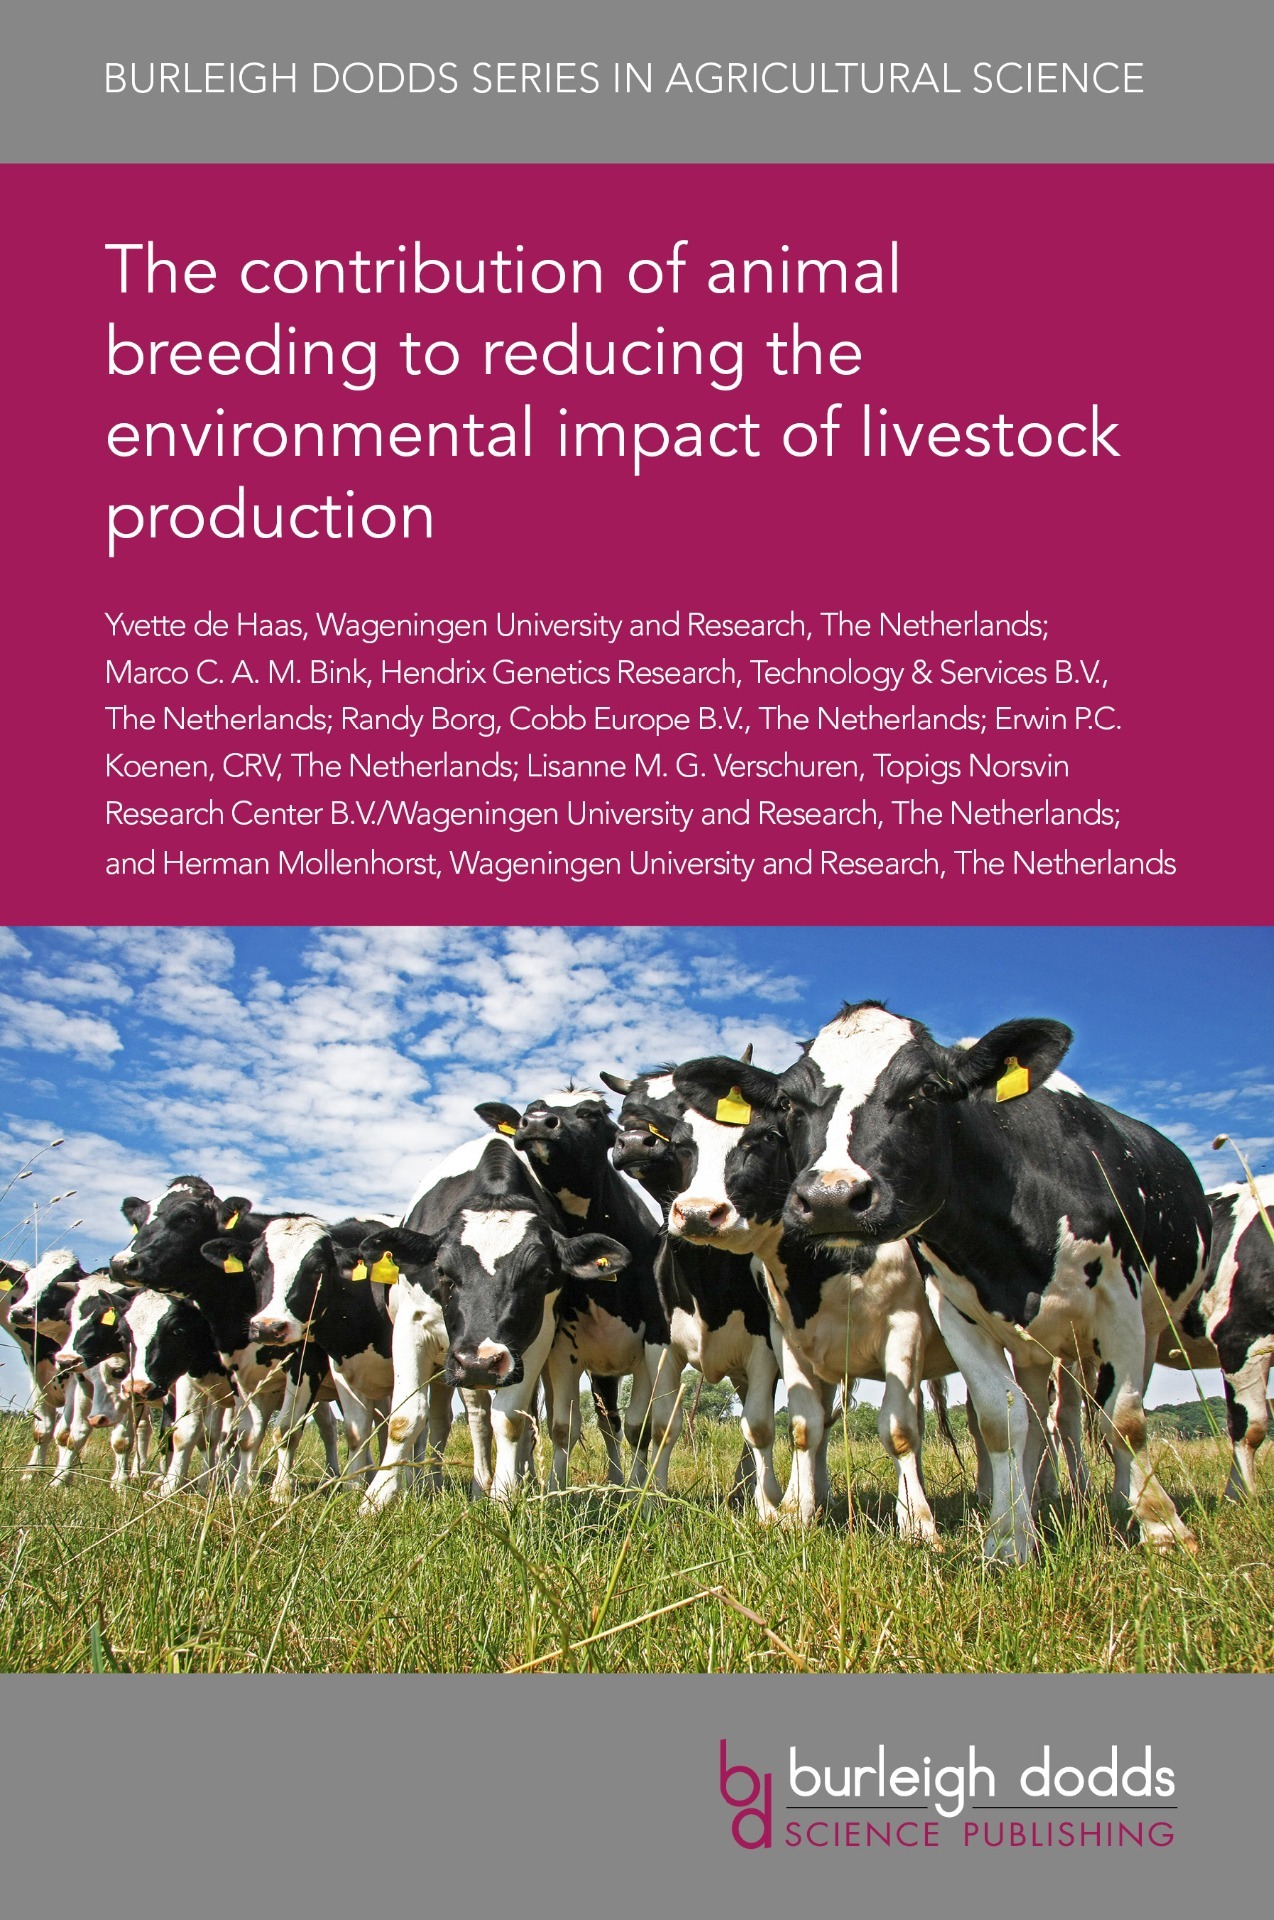 The contribution of animal breeding to reducing the environmental impact of livestock production